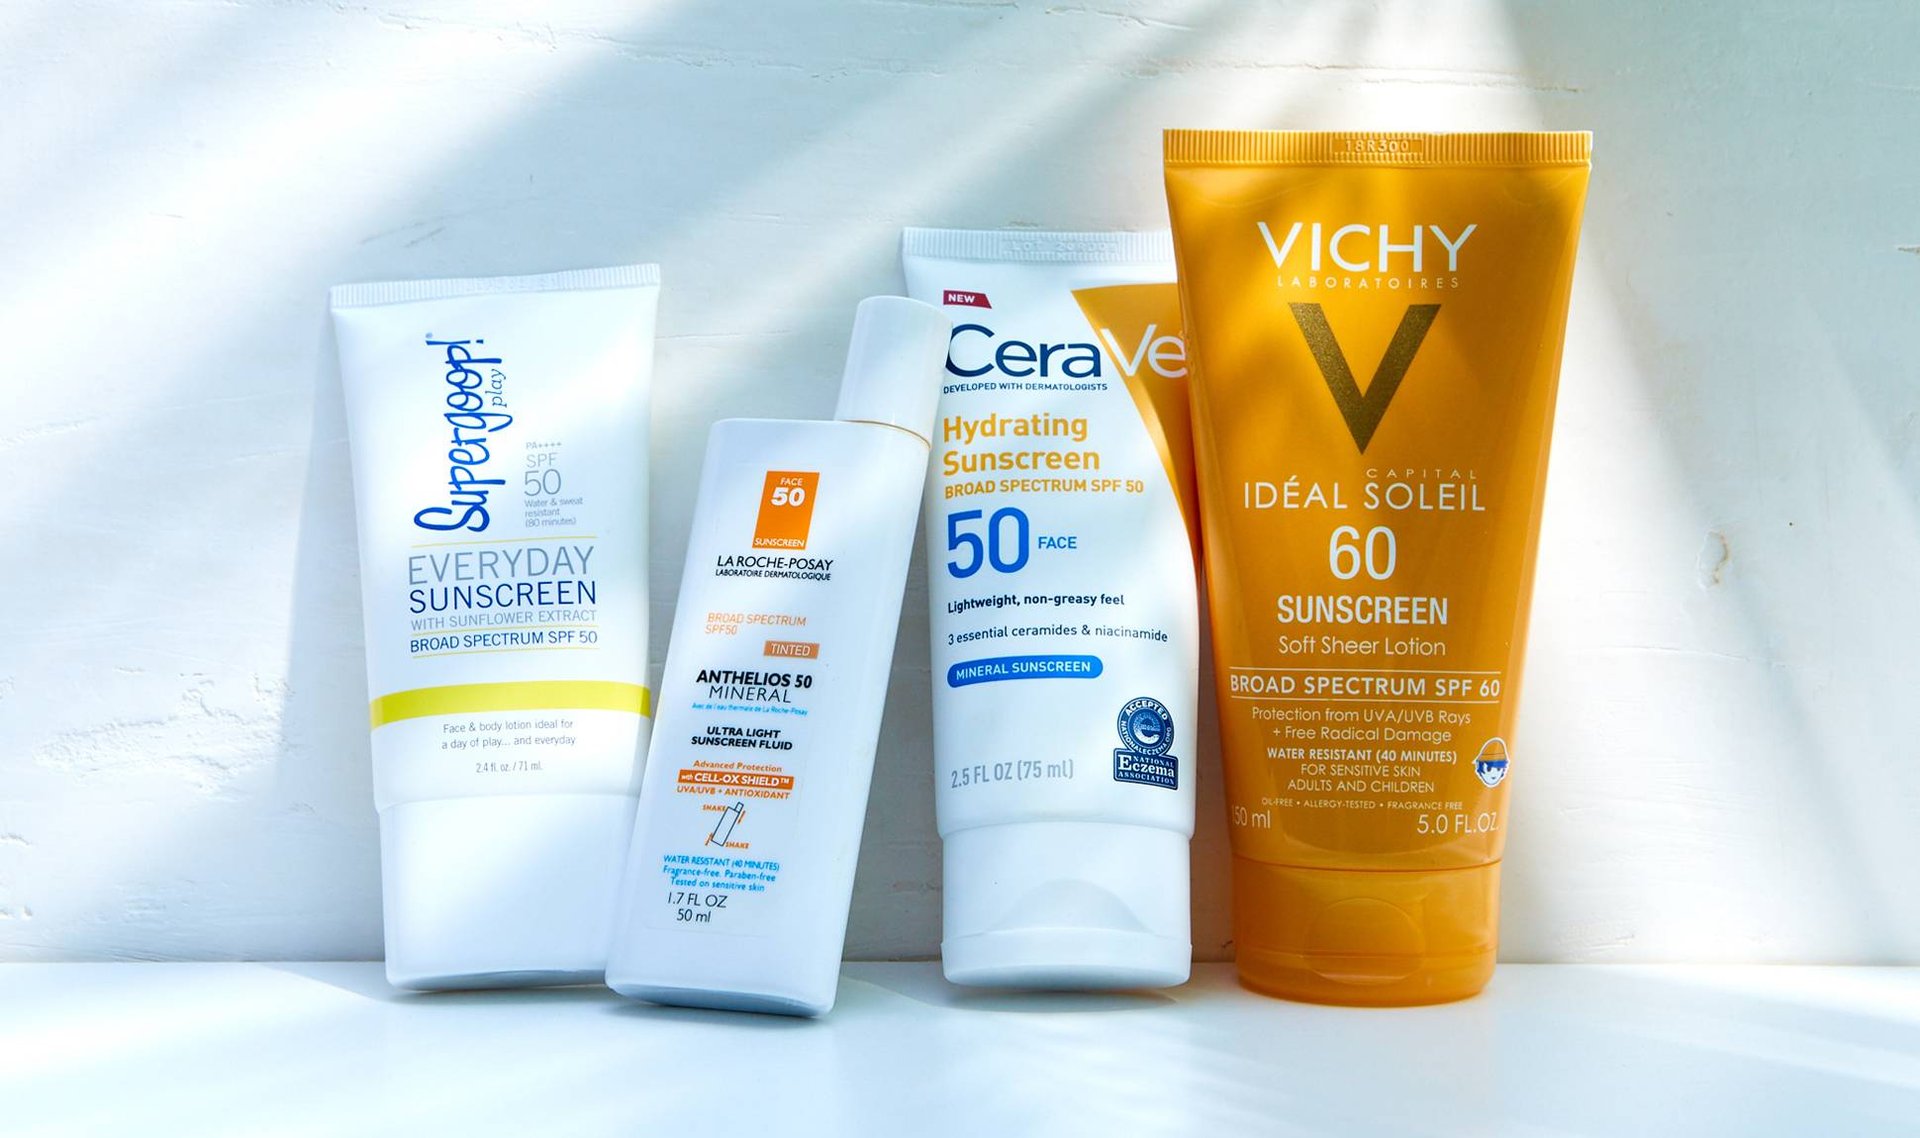 All of Your Sunscreen and Makeup Questions, Answered!